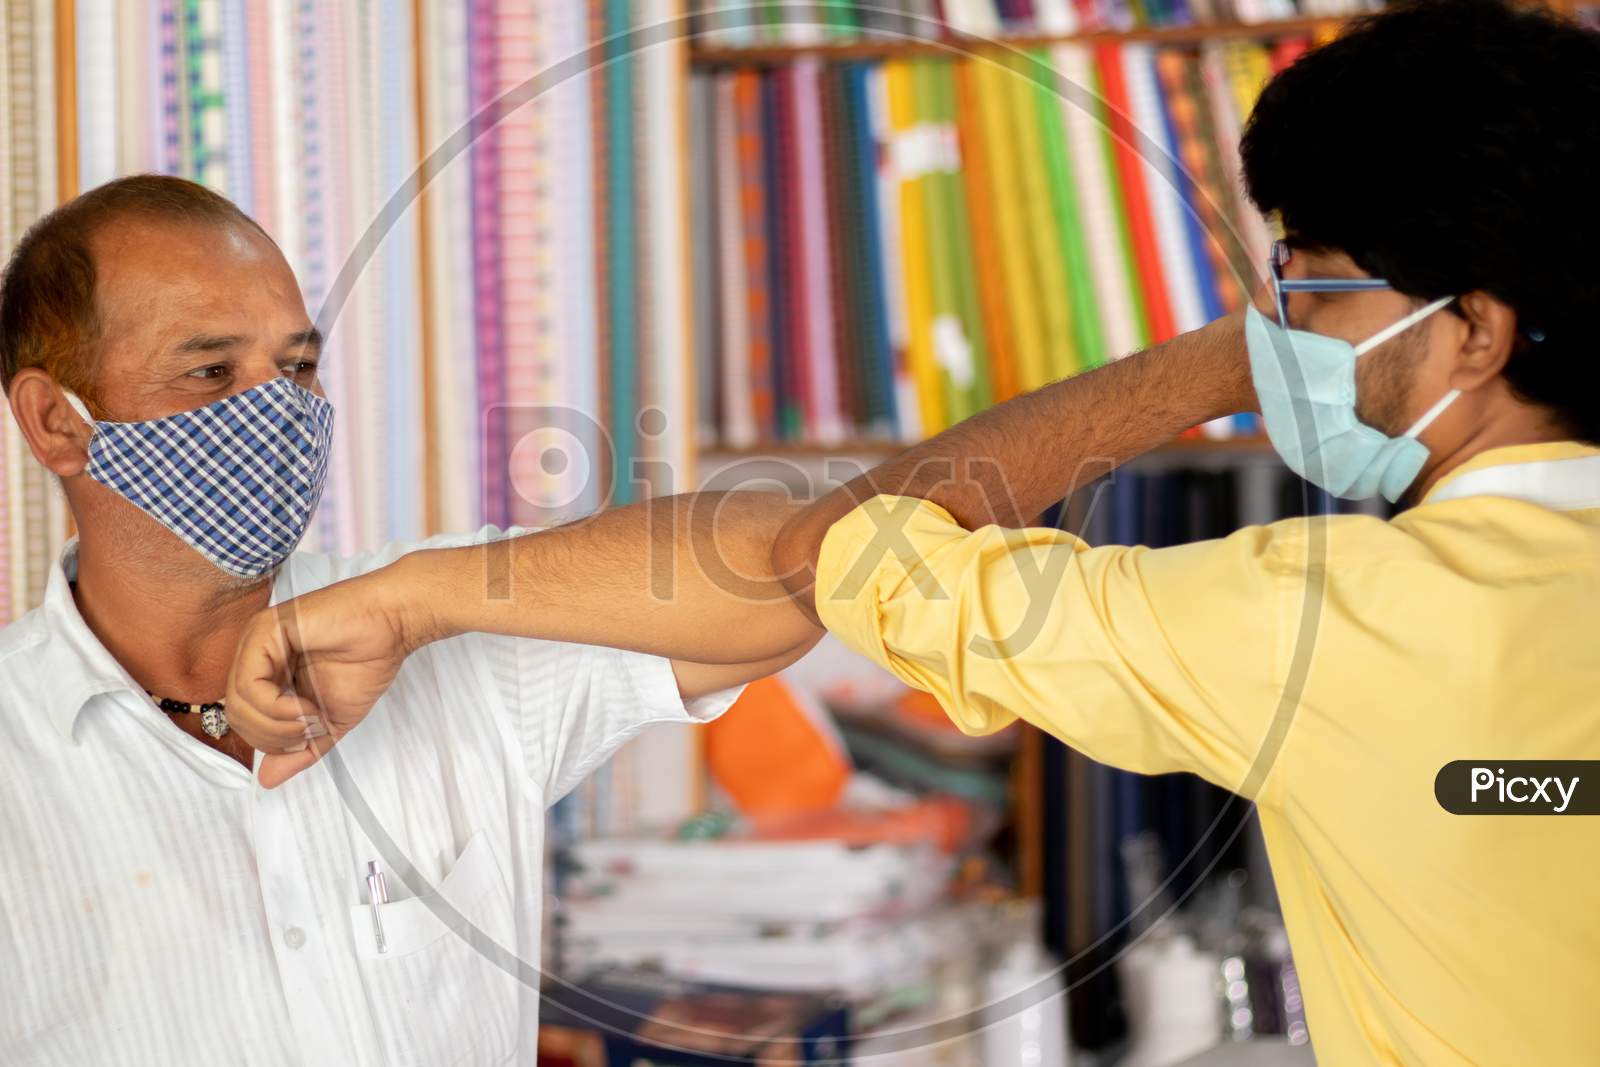 Shopkeeper Greeting Customer With Elbow Bump At Cloth Store - Concept Of People Avoiding Hand Shakes At Business Places To Stop Spreading Coronavirus Or Covid-19.